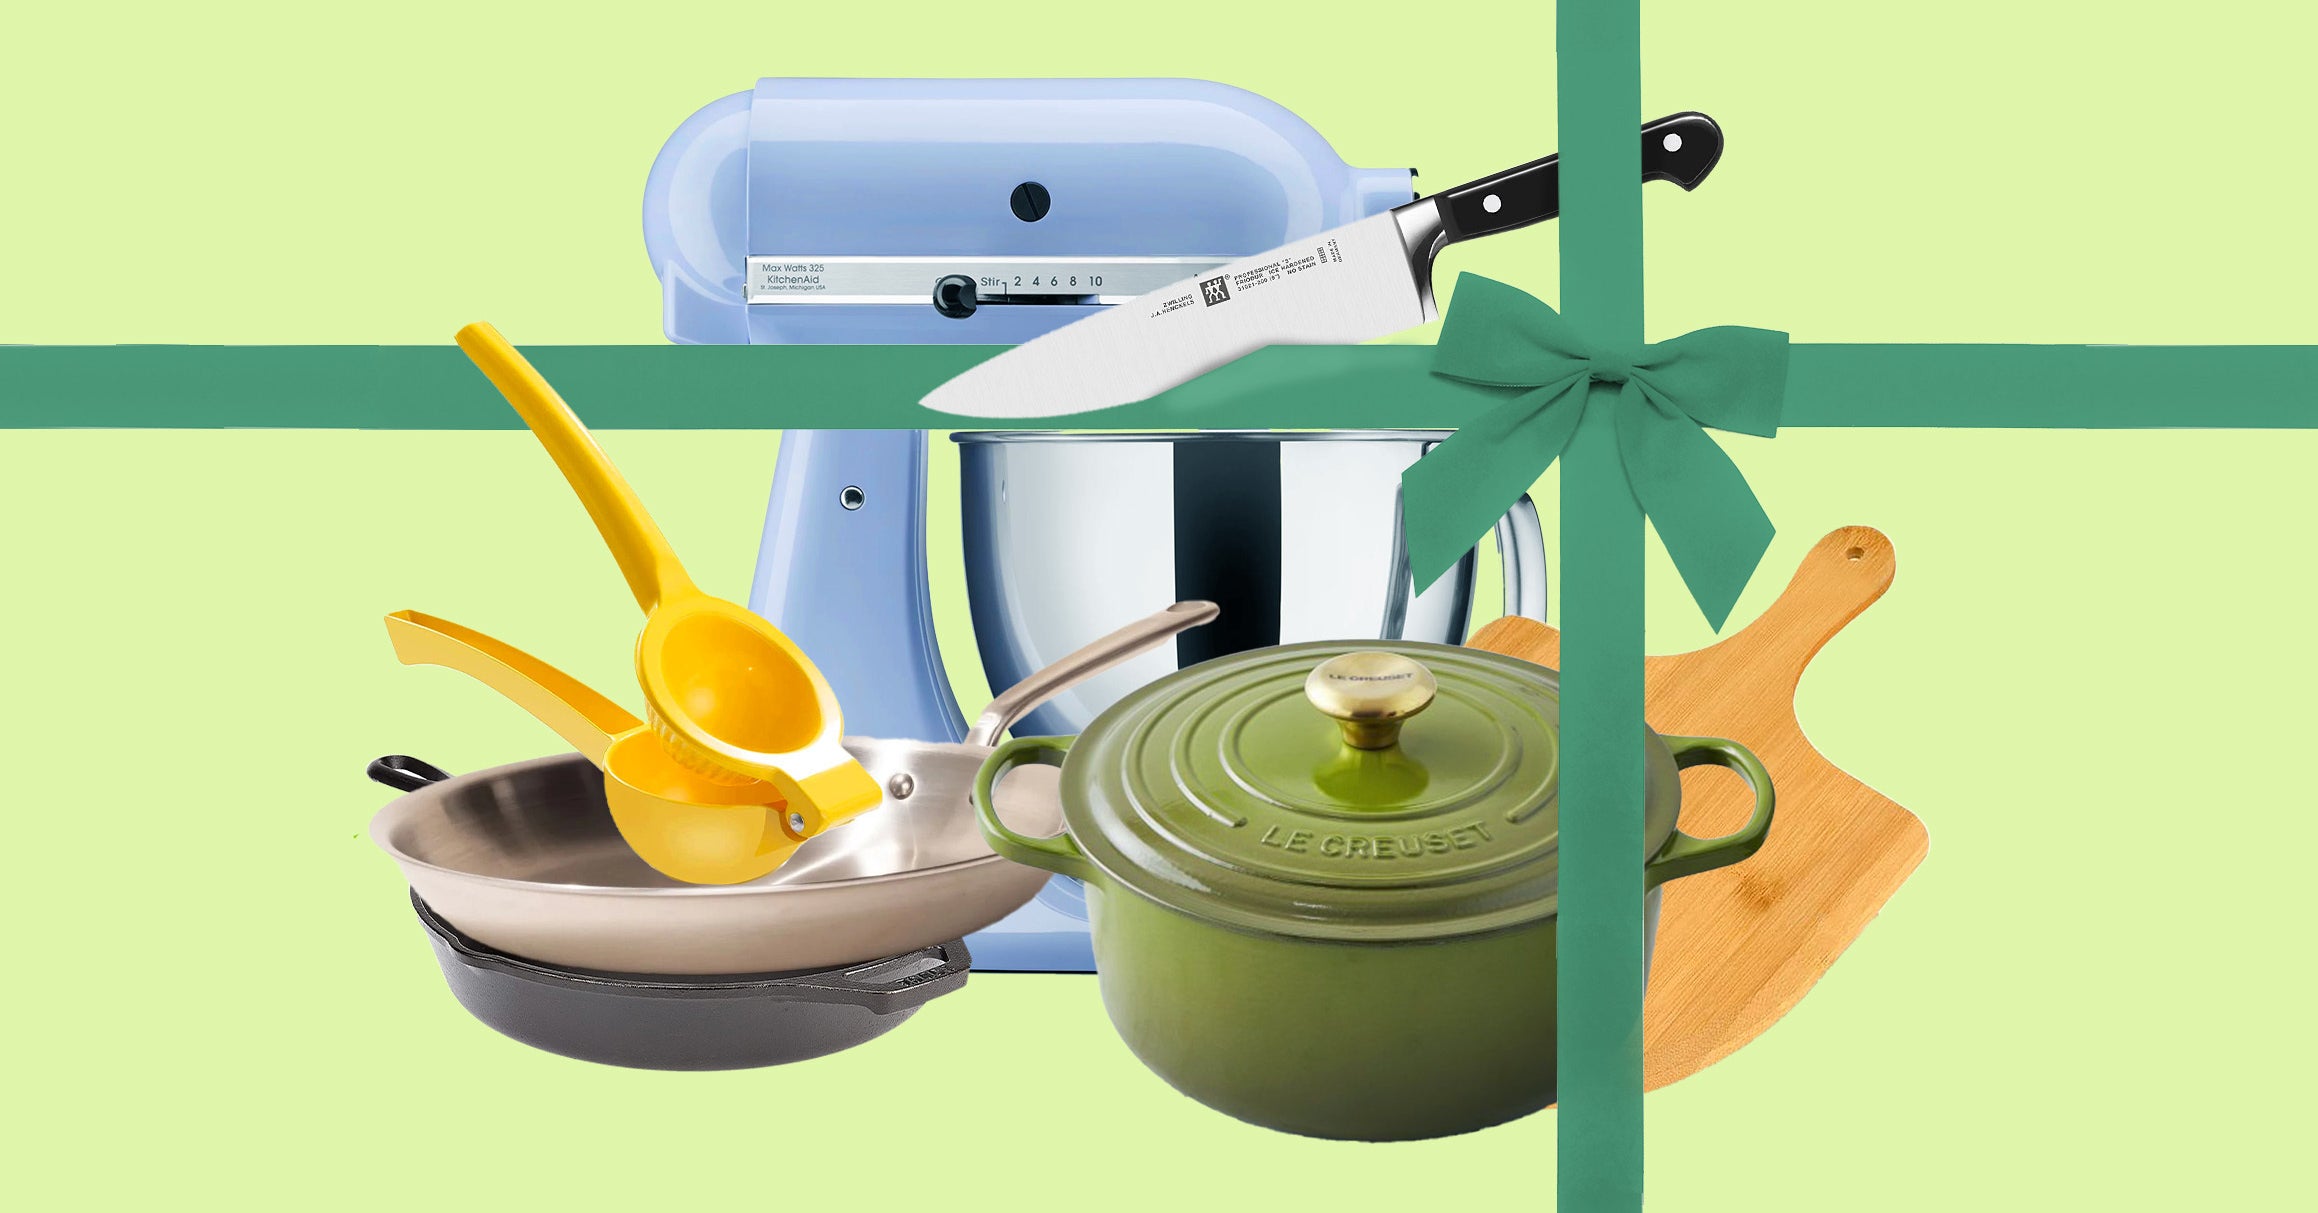 25 Kitchen Essentials That Every Home Cook Needs - Love and Lemons